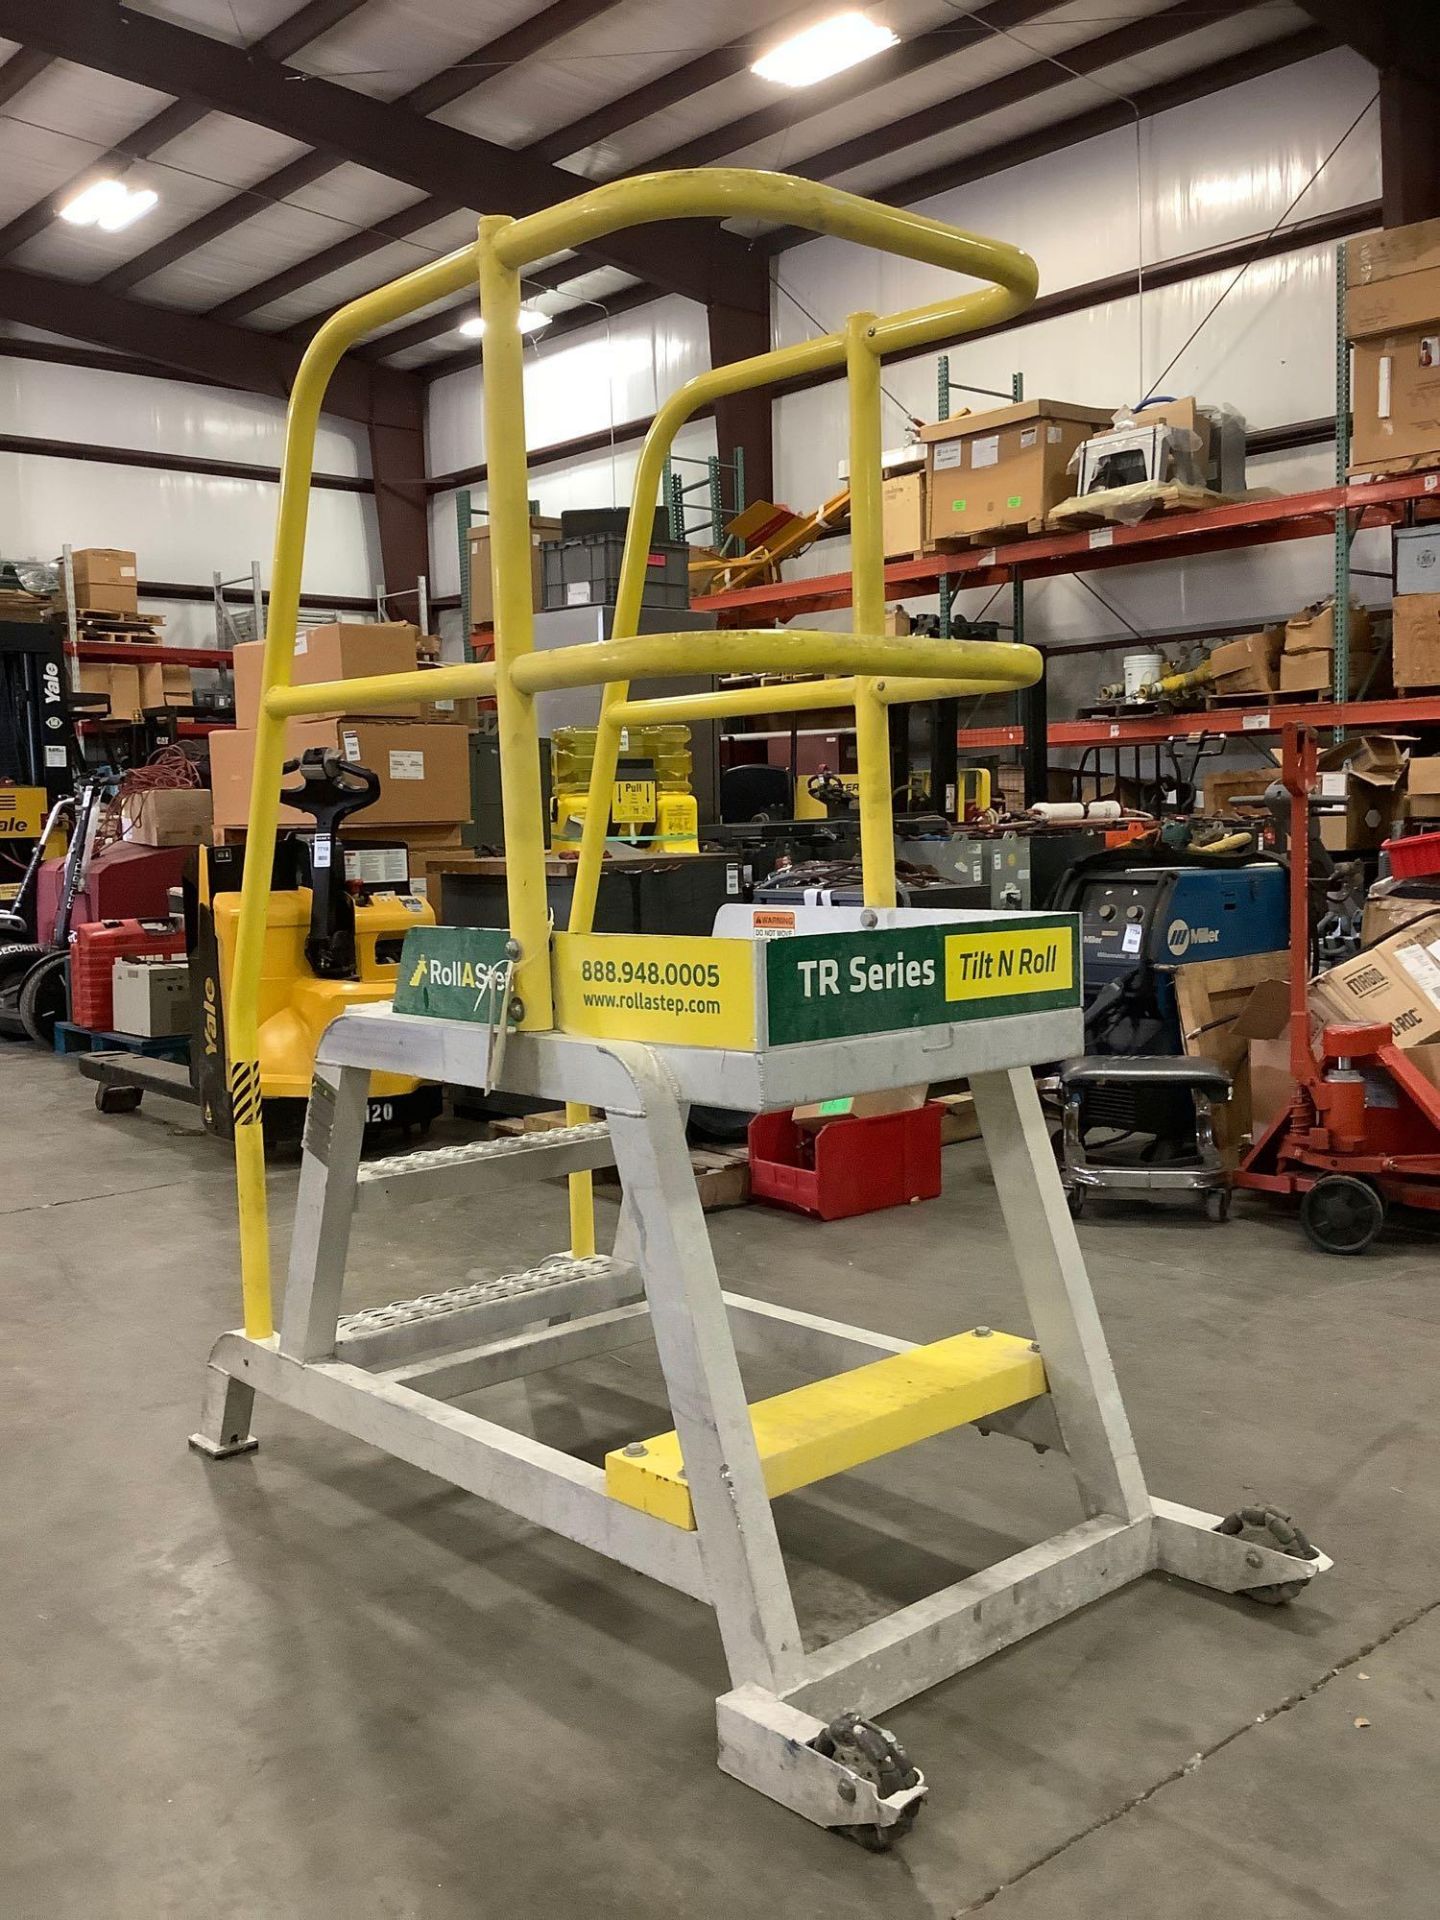 ROLLASTEP TR TILT N ROLL SERIES INDUSTRIAL LADDER, ALUMINUM CONSTRUCTION, APPROX 70in TALL x 32in WI - Image 6 of 9